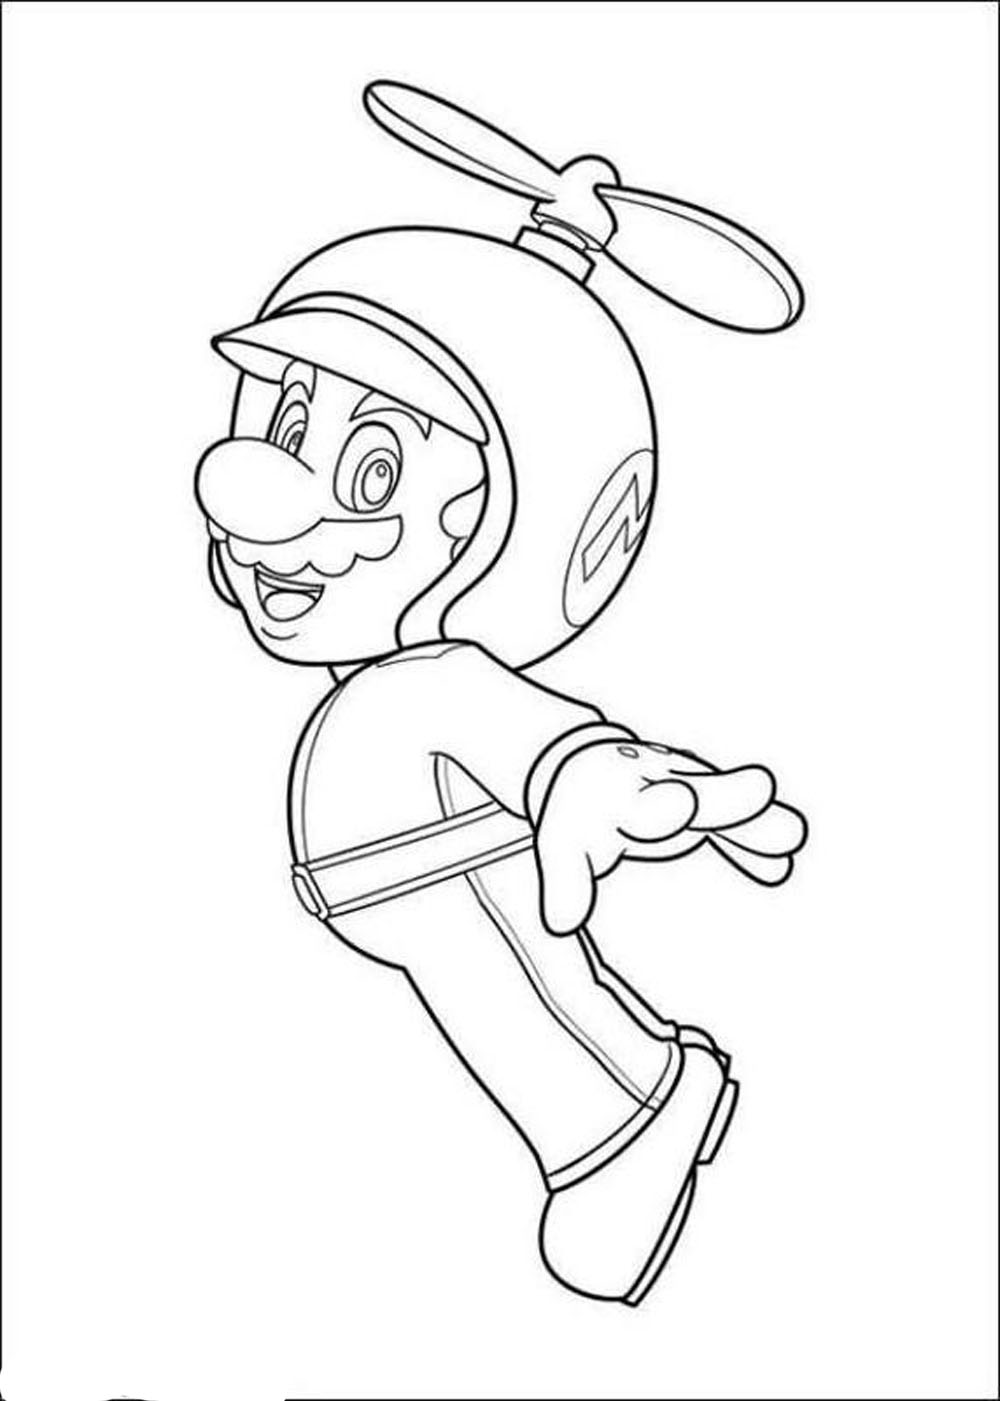 super-mario-coloring-pages-printable-customize-and-print